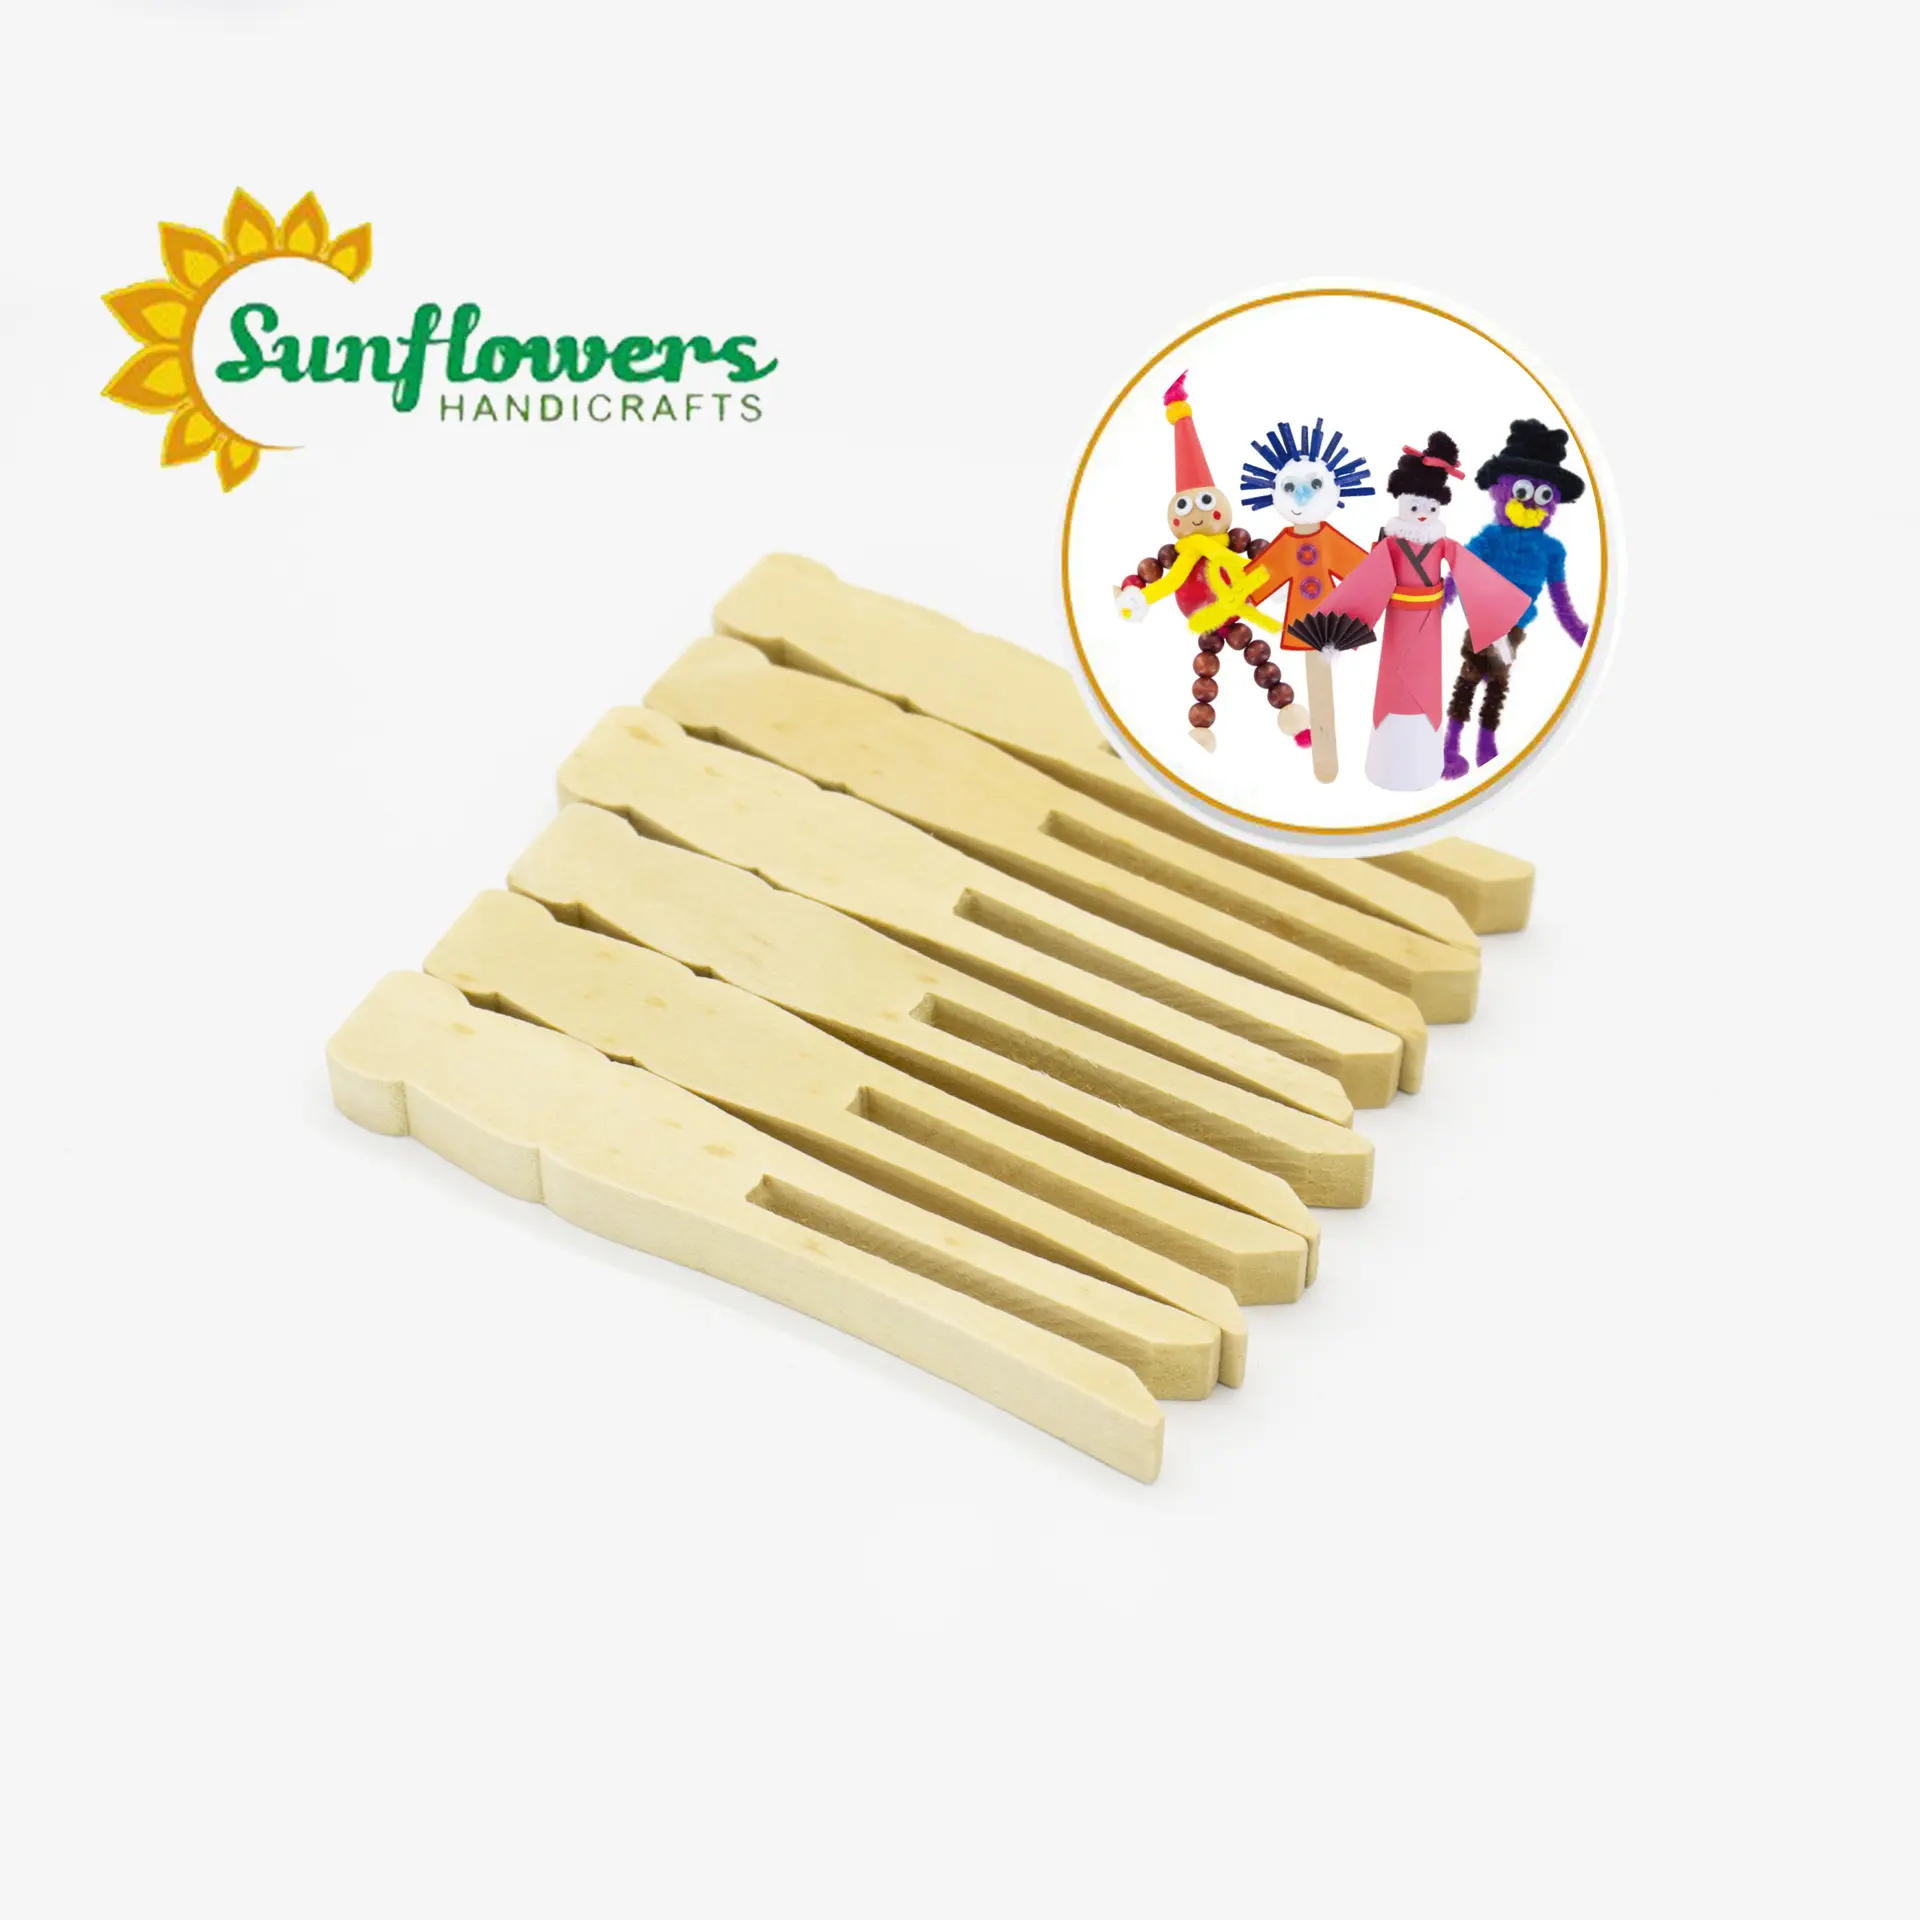 2 1/2" Natural Wood Flat Clothespins for Crafting, embellishing, classroom projects, party crafts, or home decor projects